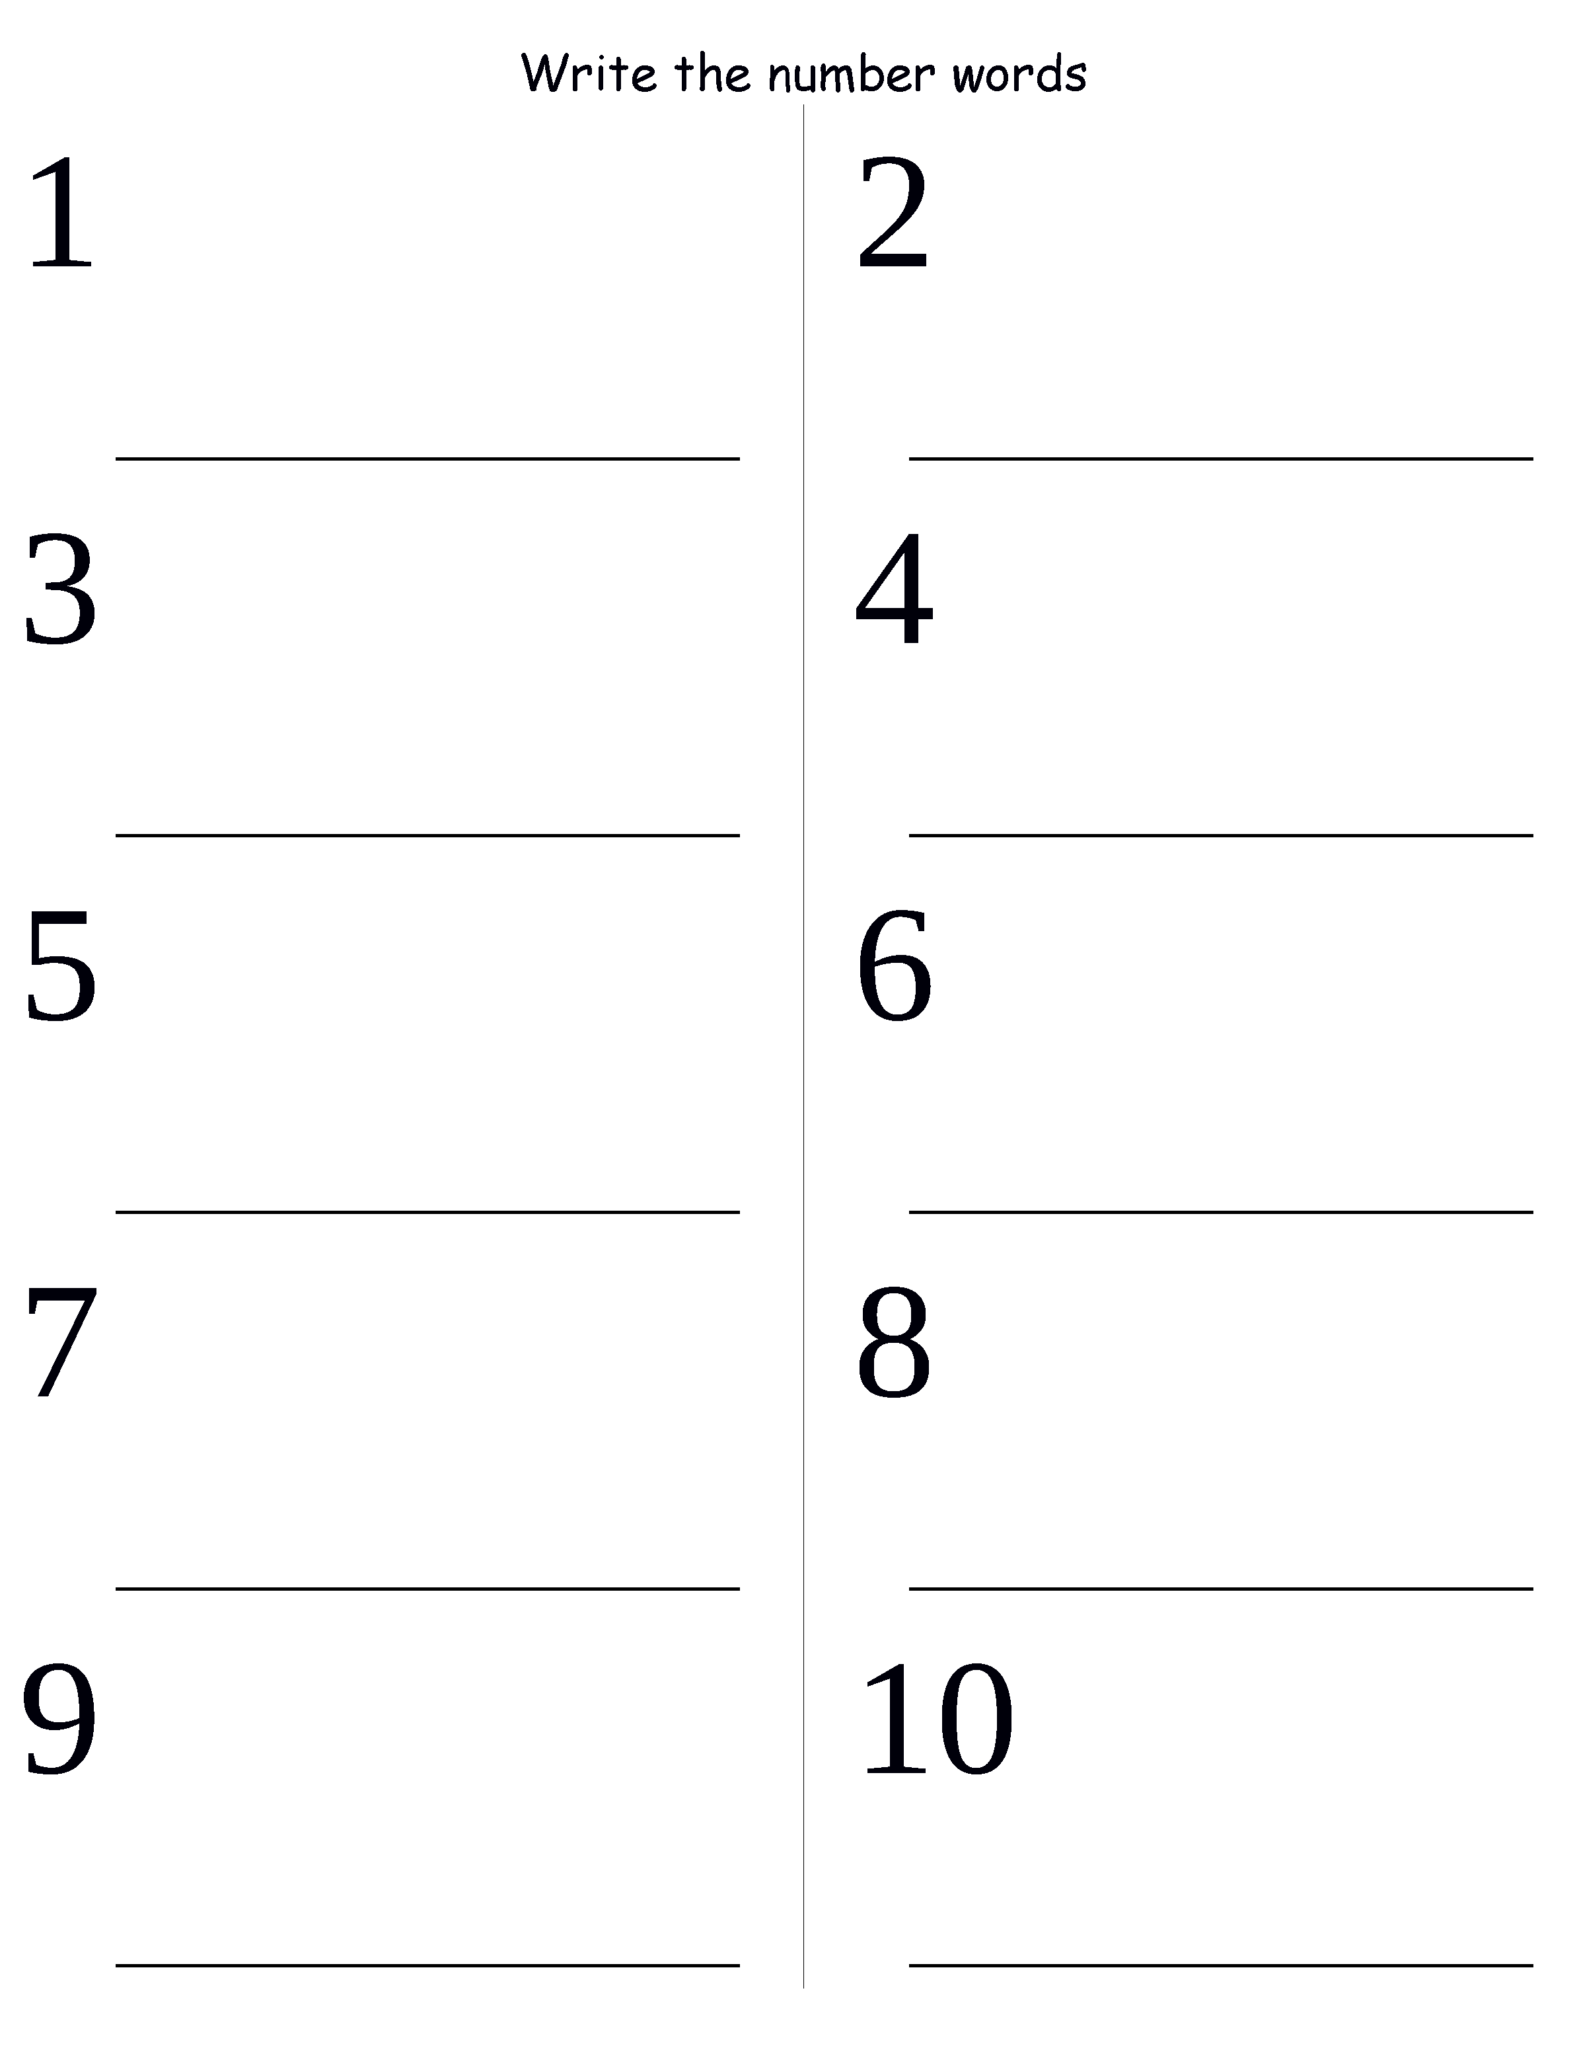 numbers-and-their-names-number-names-1-to-50-how-to-write-numbers